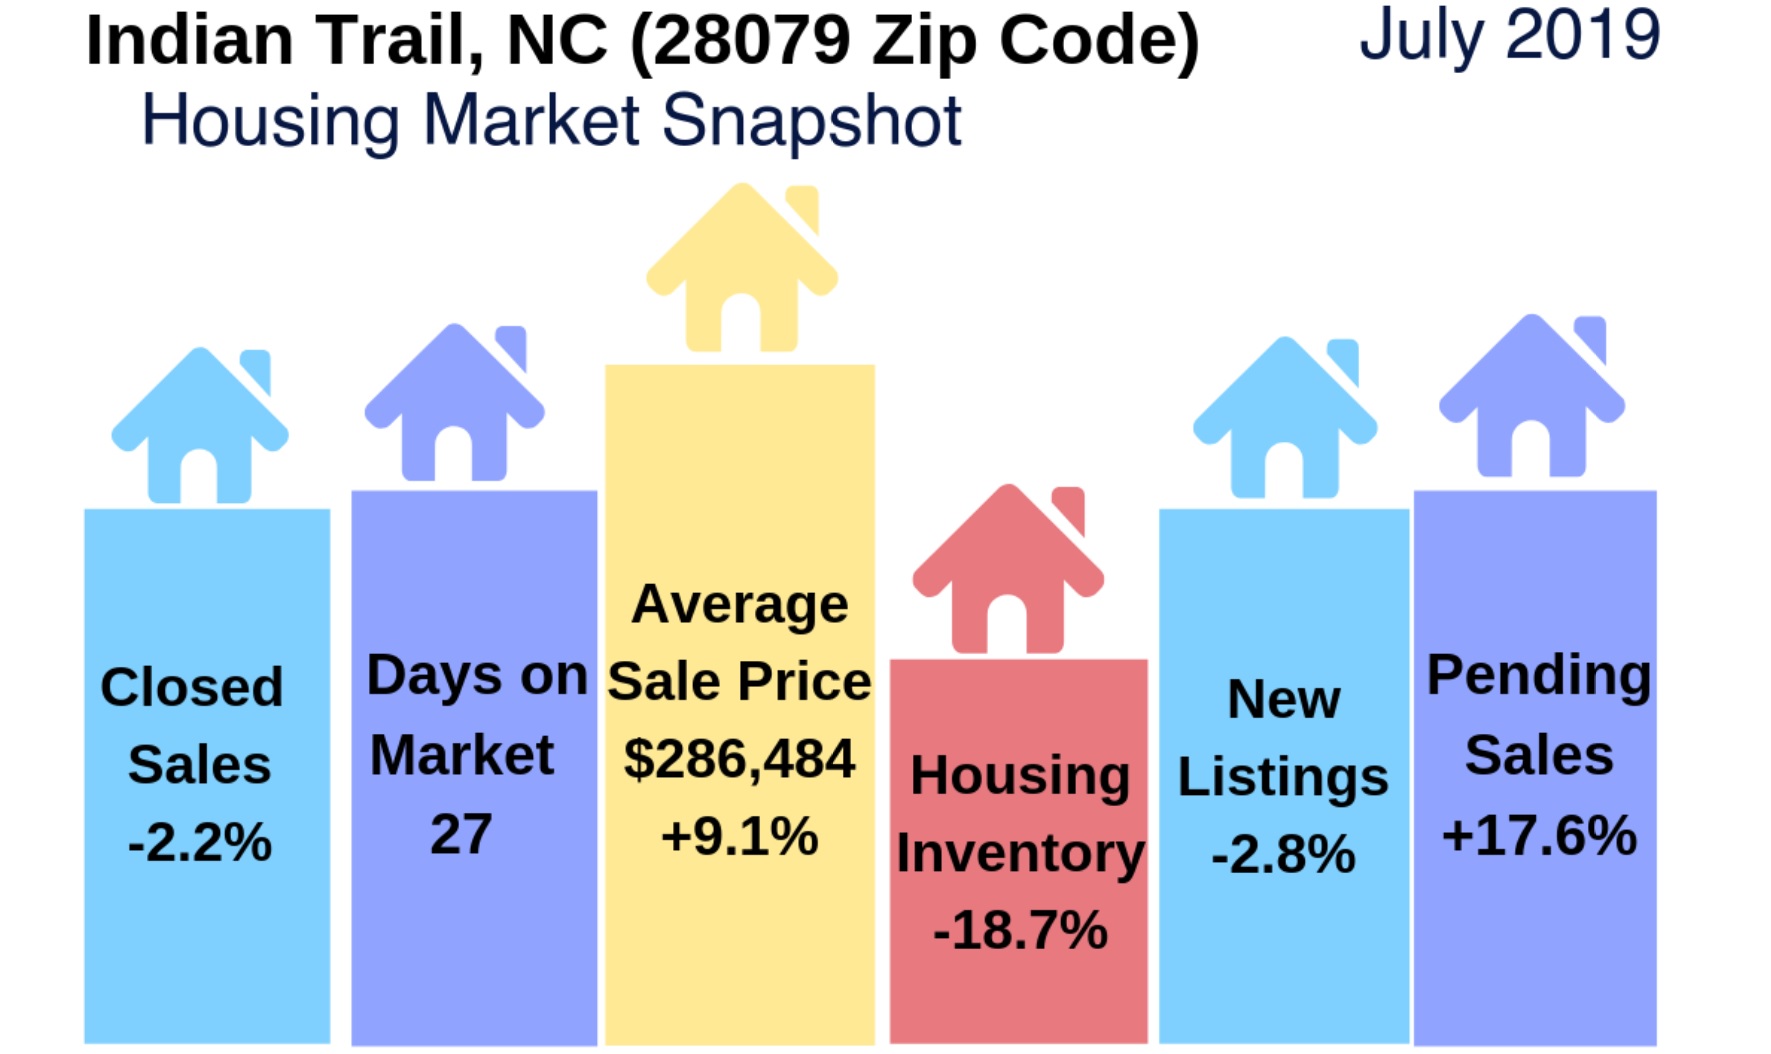 Indian Trail (29079 Zip Code) Real Estate Report: July 2019